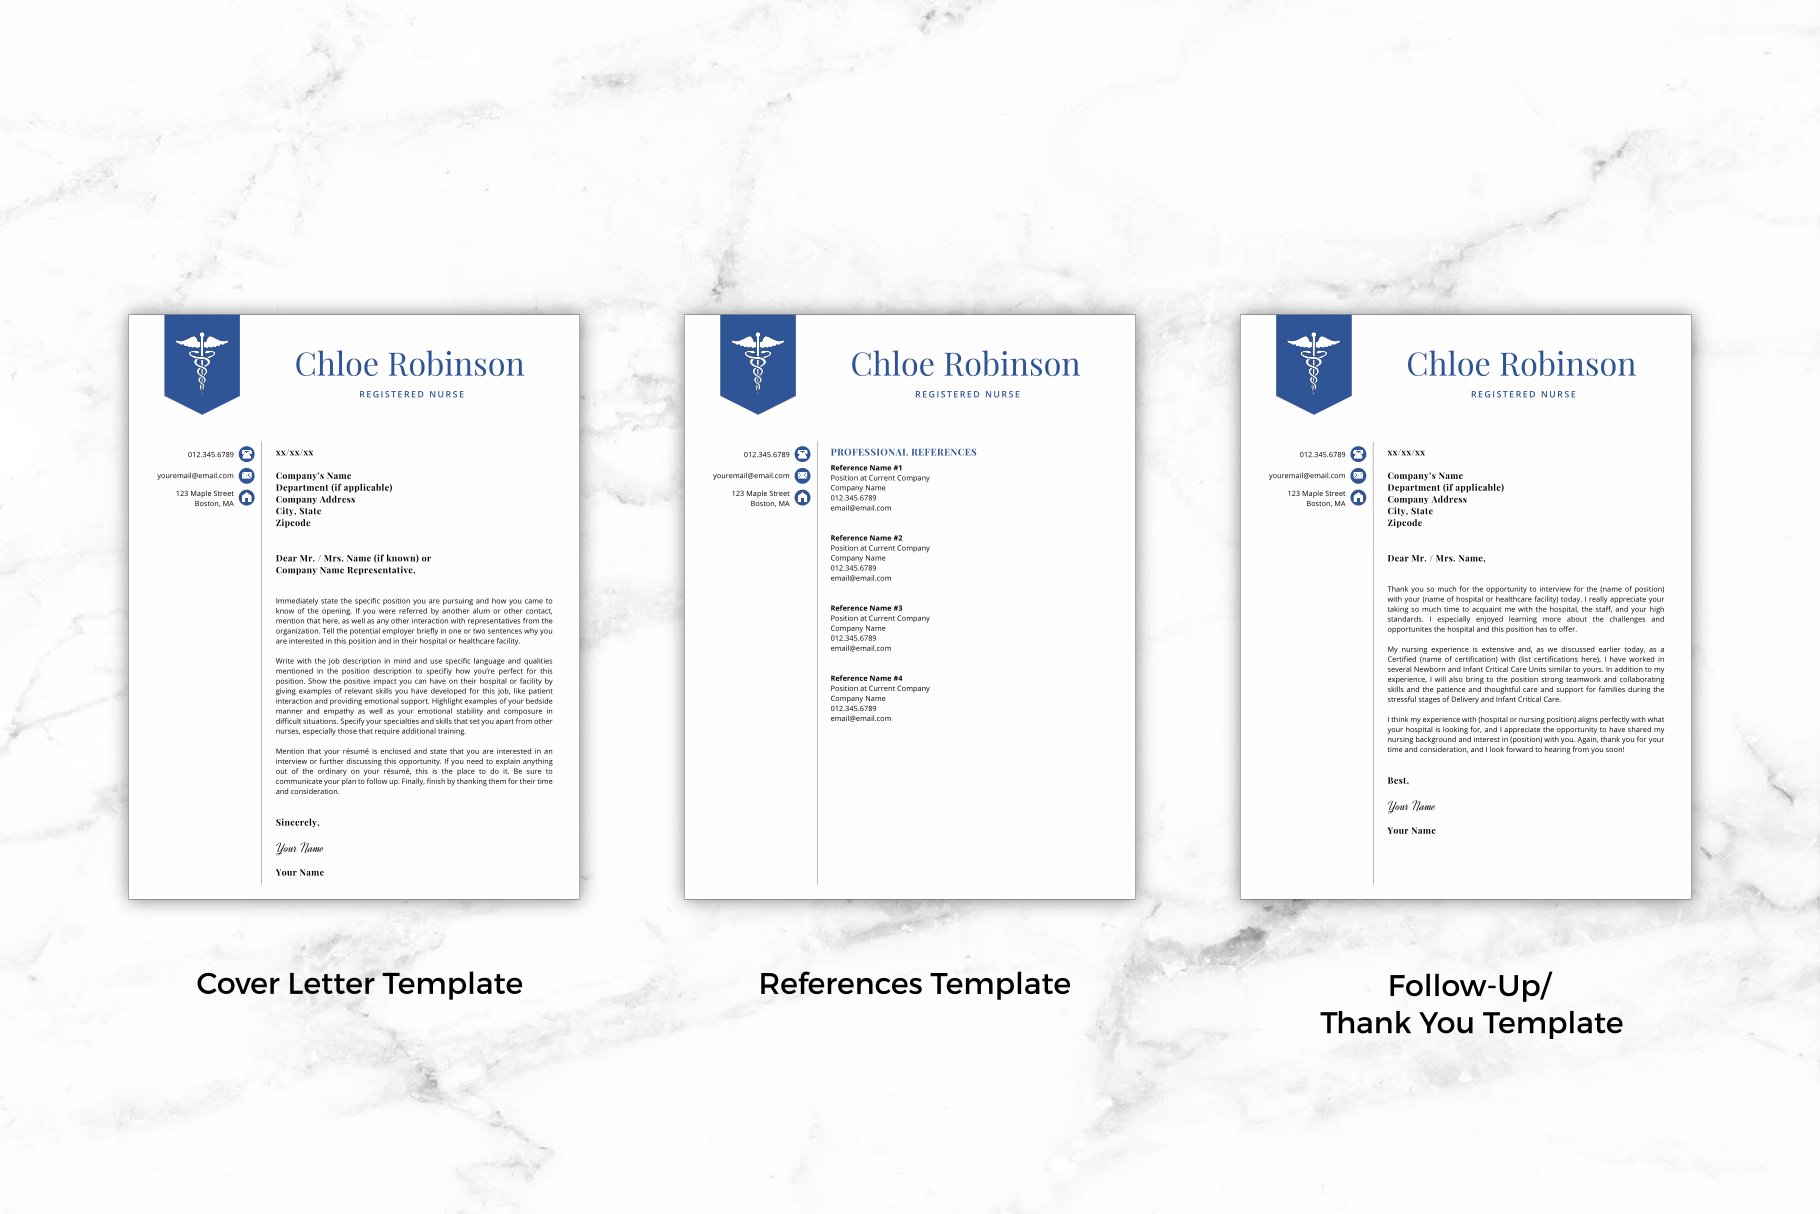 Three different resume templates on a marble background.